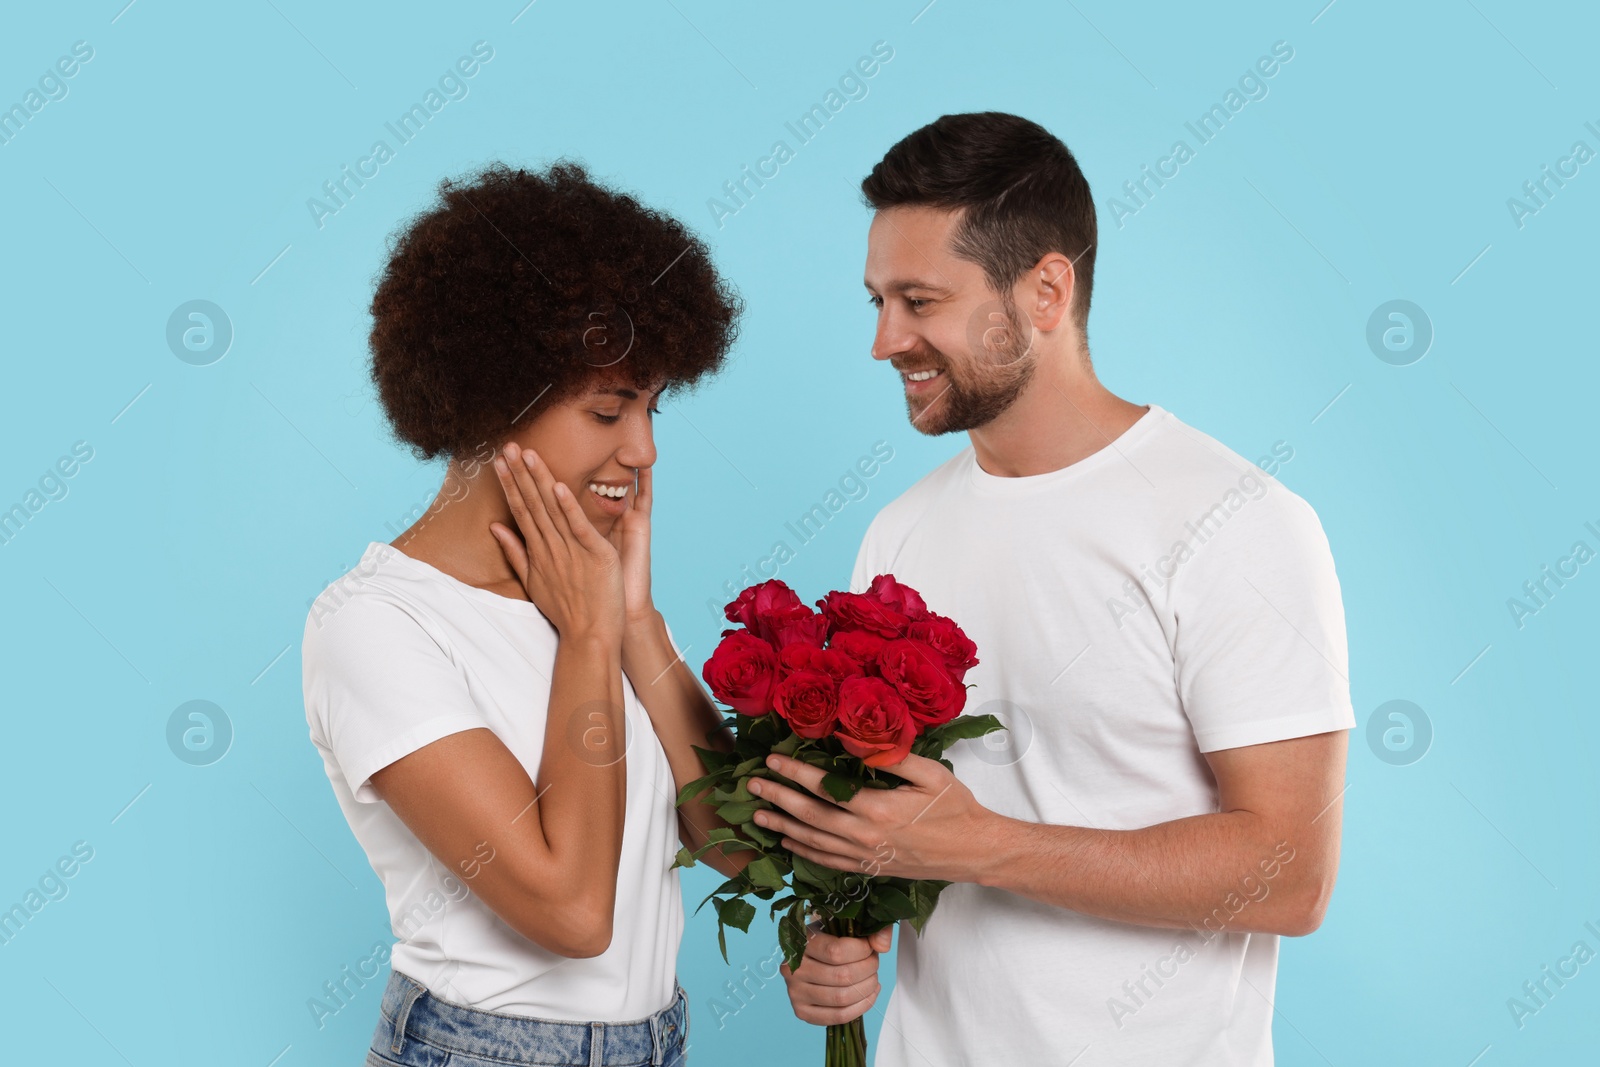 Photo of International dating. Handsome man presenting roses to his beloved woman on light blue background